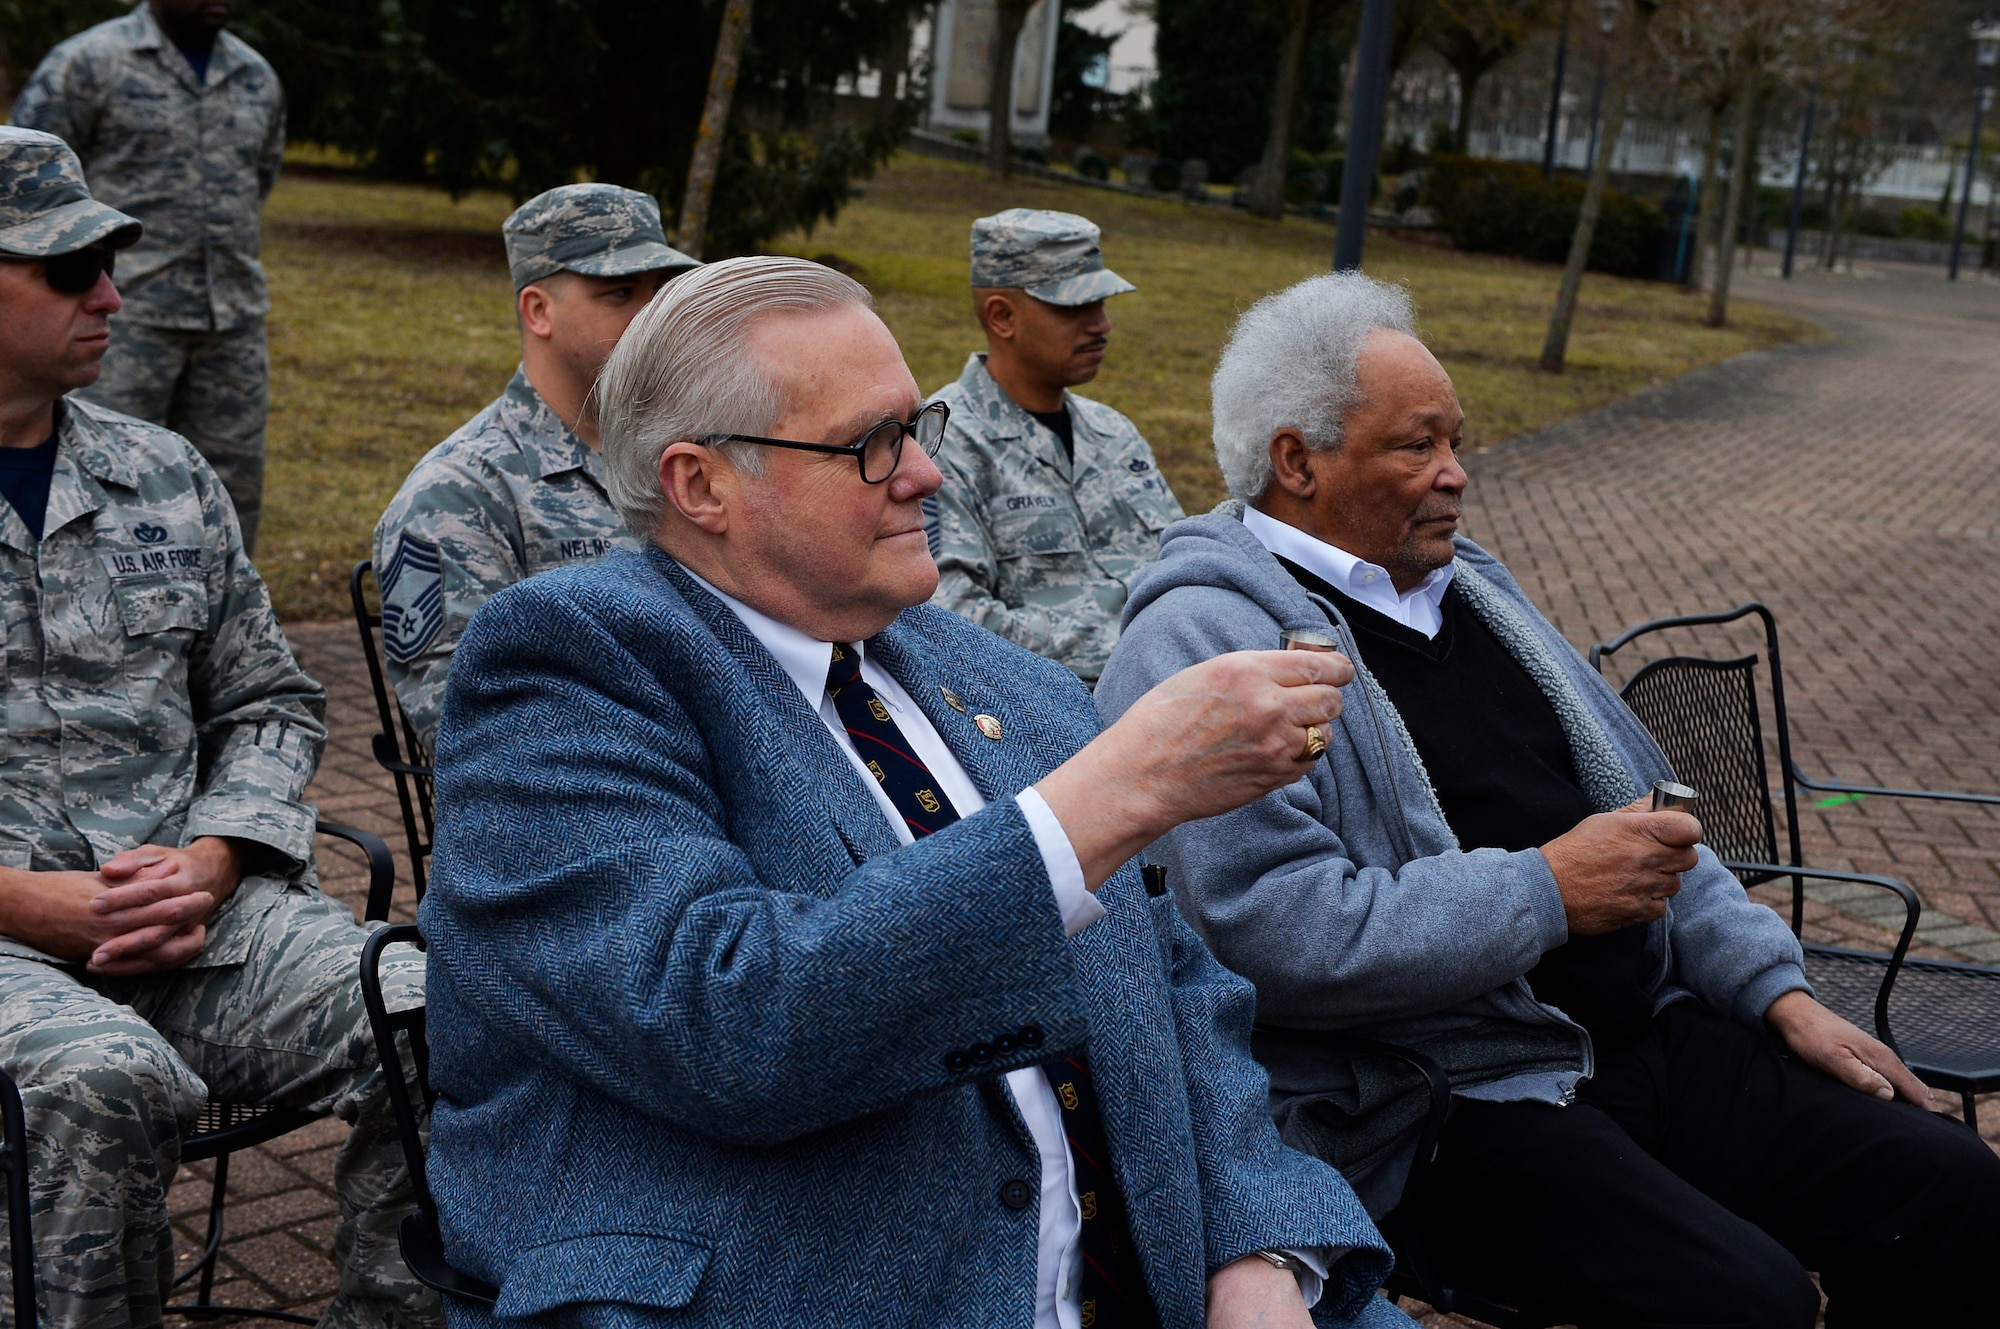 Vietnam War veterans and raise a toast during a memorial service for the River Rats Memorial monument on Ramstein Air Base, Germany, Feb. 17, 2017. The Red River Rats Fighter Pilots Association, which was comprised of those who flew missions over the Red River Valley in Vietnam, established the monument in 1976 to commemorate Airmen who never returned from the war. Of more than two million U.S. troops who served in Vietnam, more than 55,000 lost their lives. (U.S. Air Force photo by Airman 1st Class Joshua Magbanua)